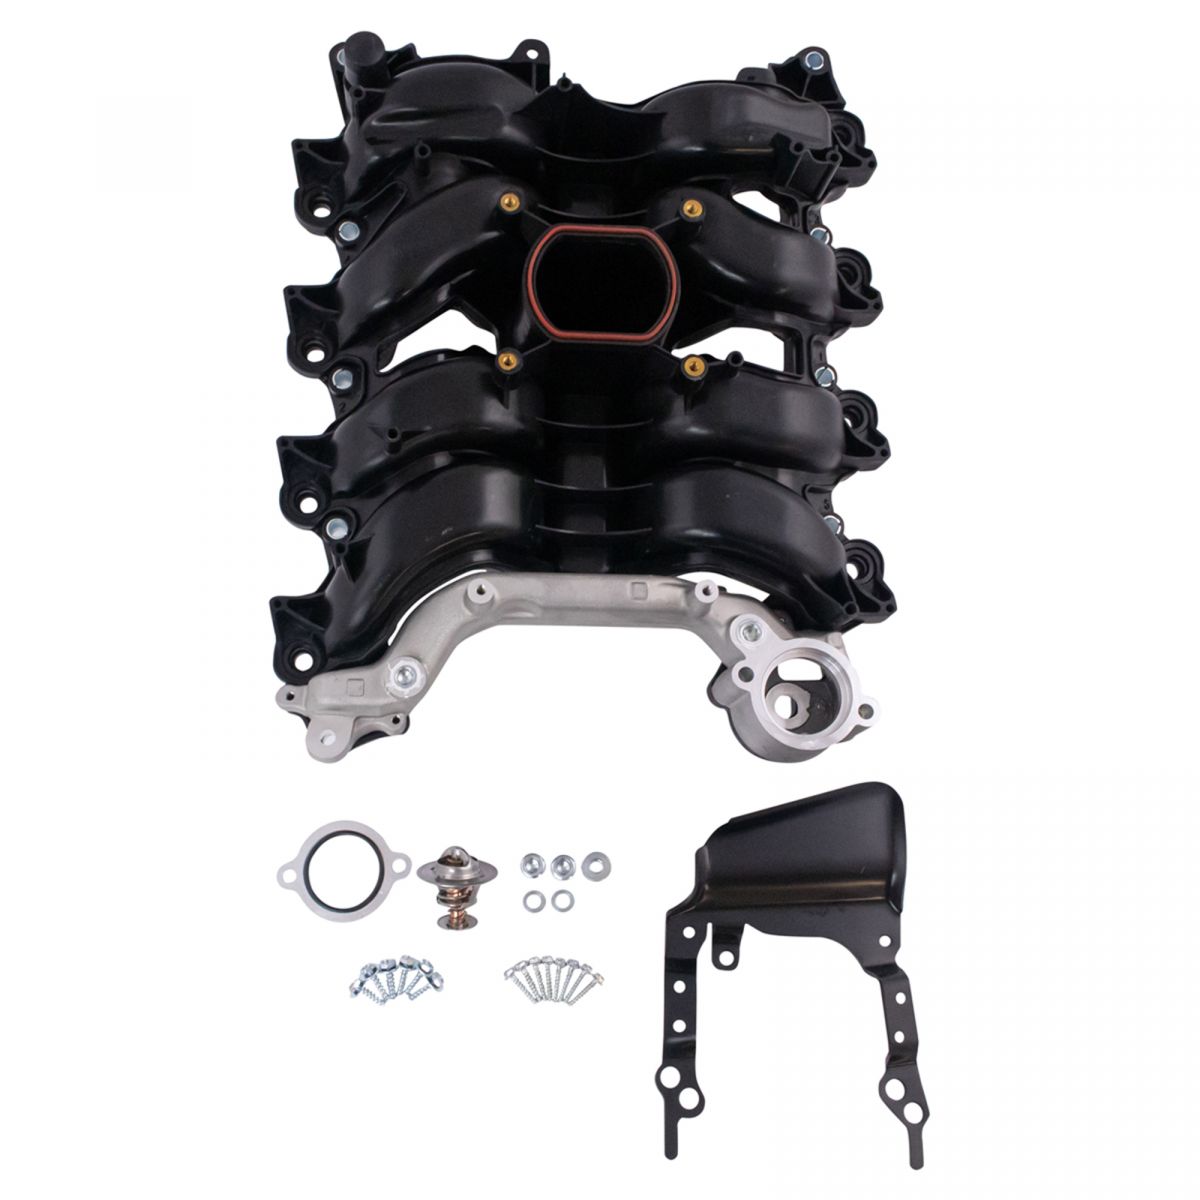 Intake Manifold w// Thermostat /& Gaskets Kit NEW for Ford Lincoln Mercury 4.6L V8